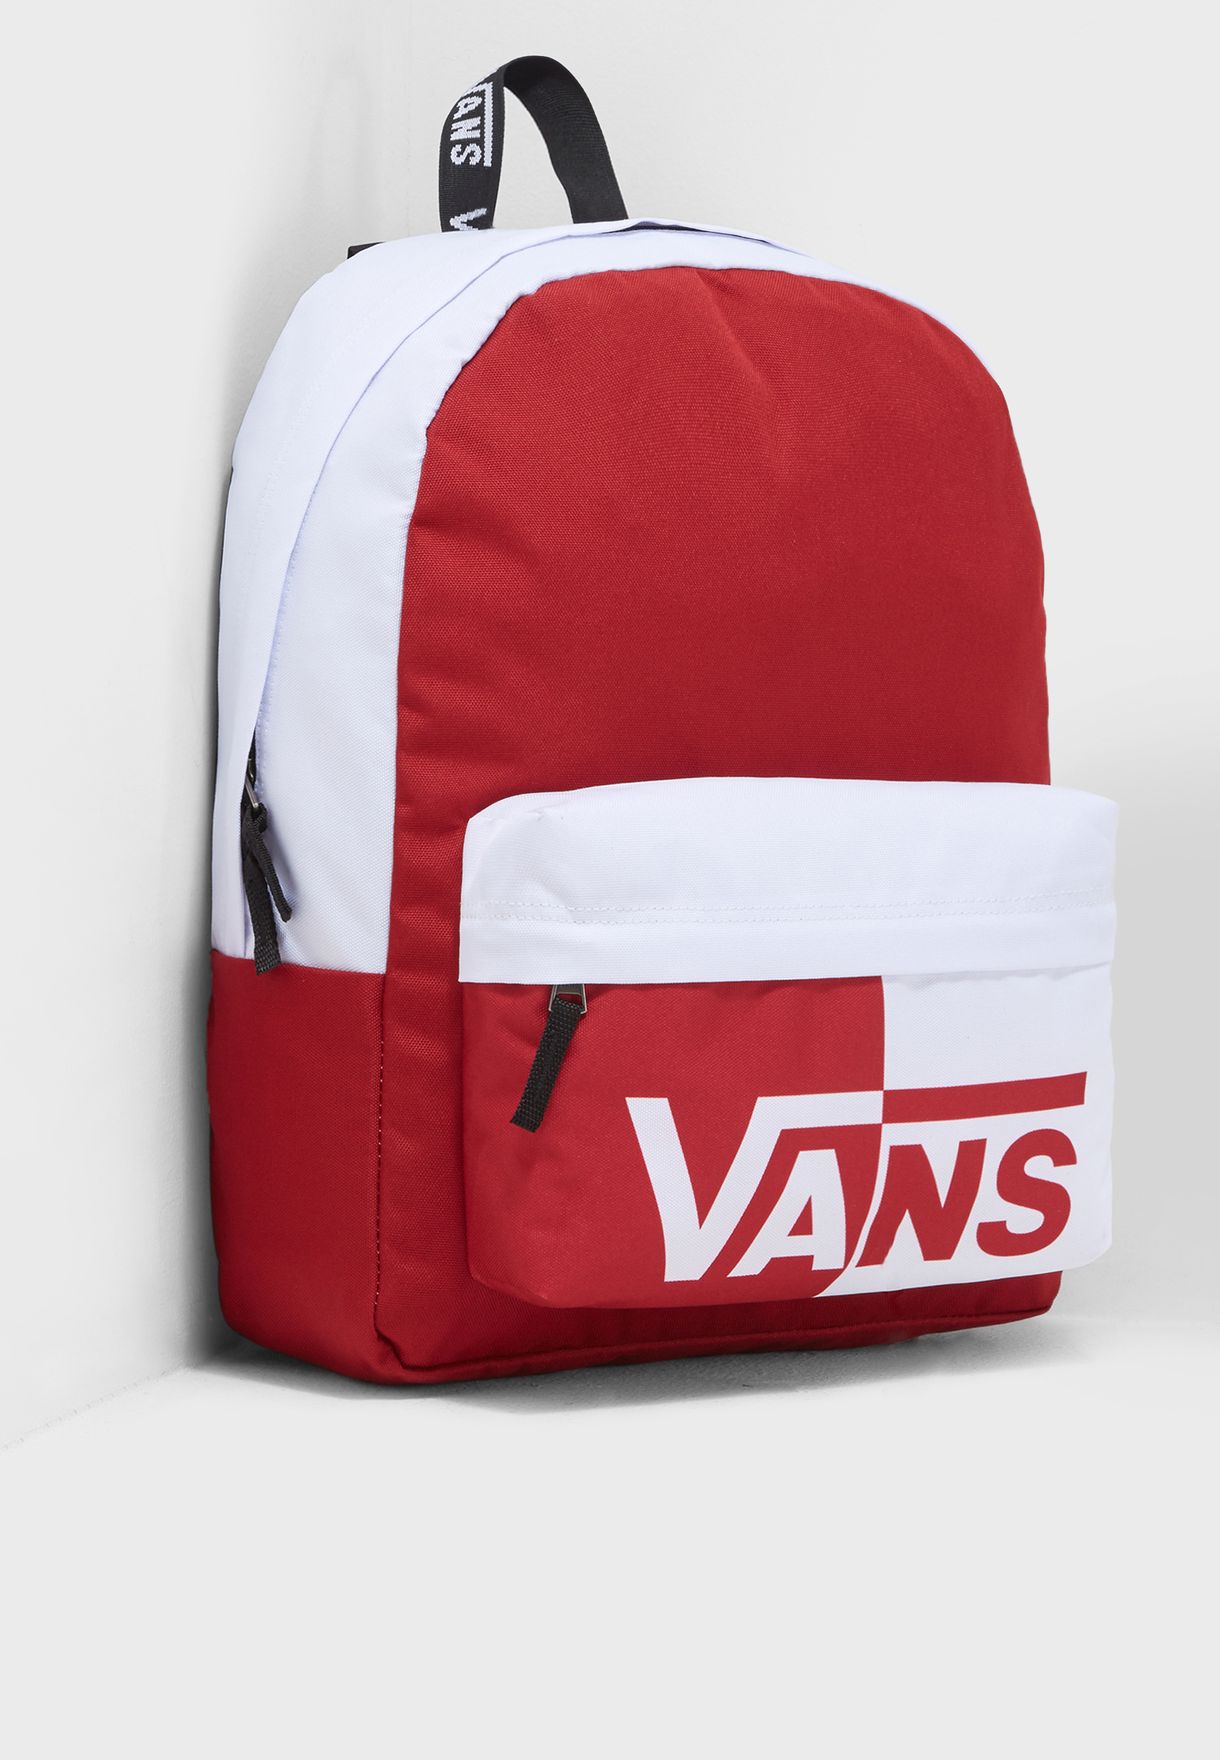 vans sporty realm red & checkerboard backpack